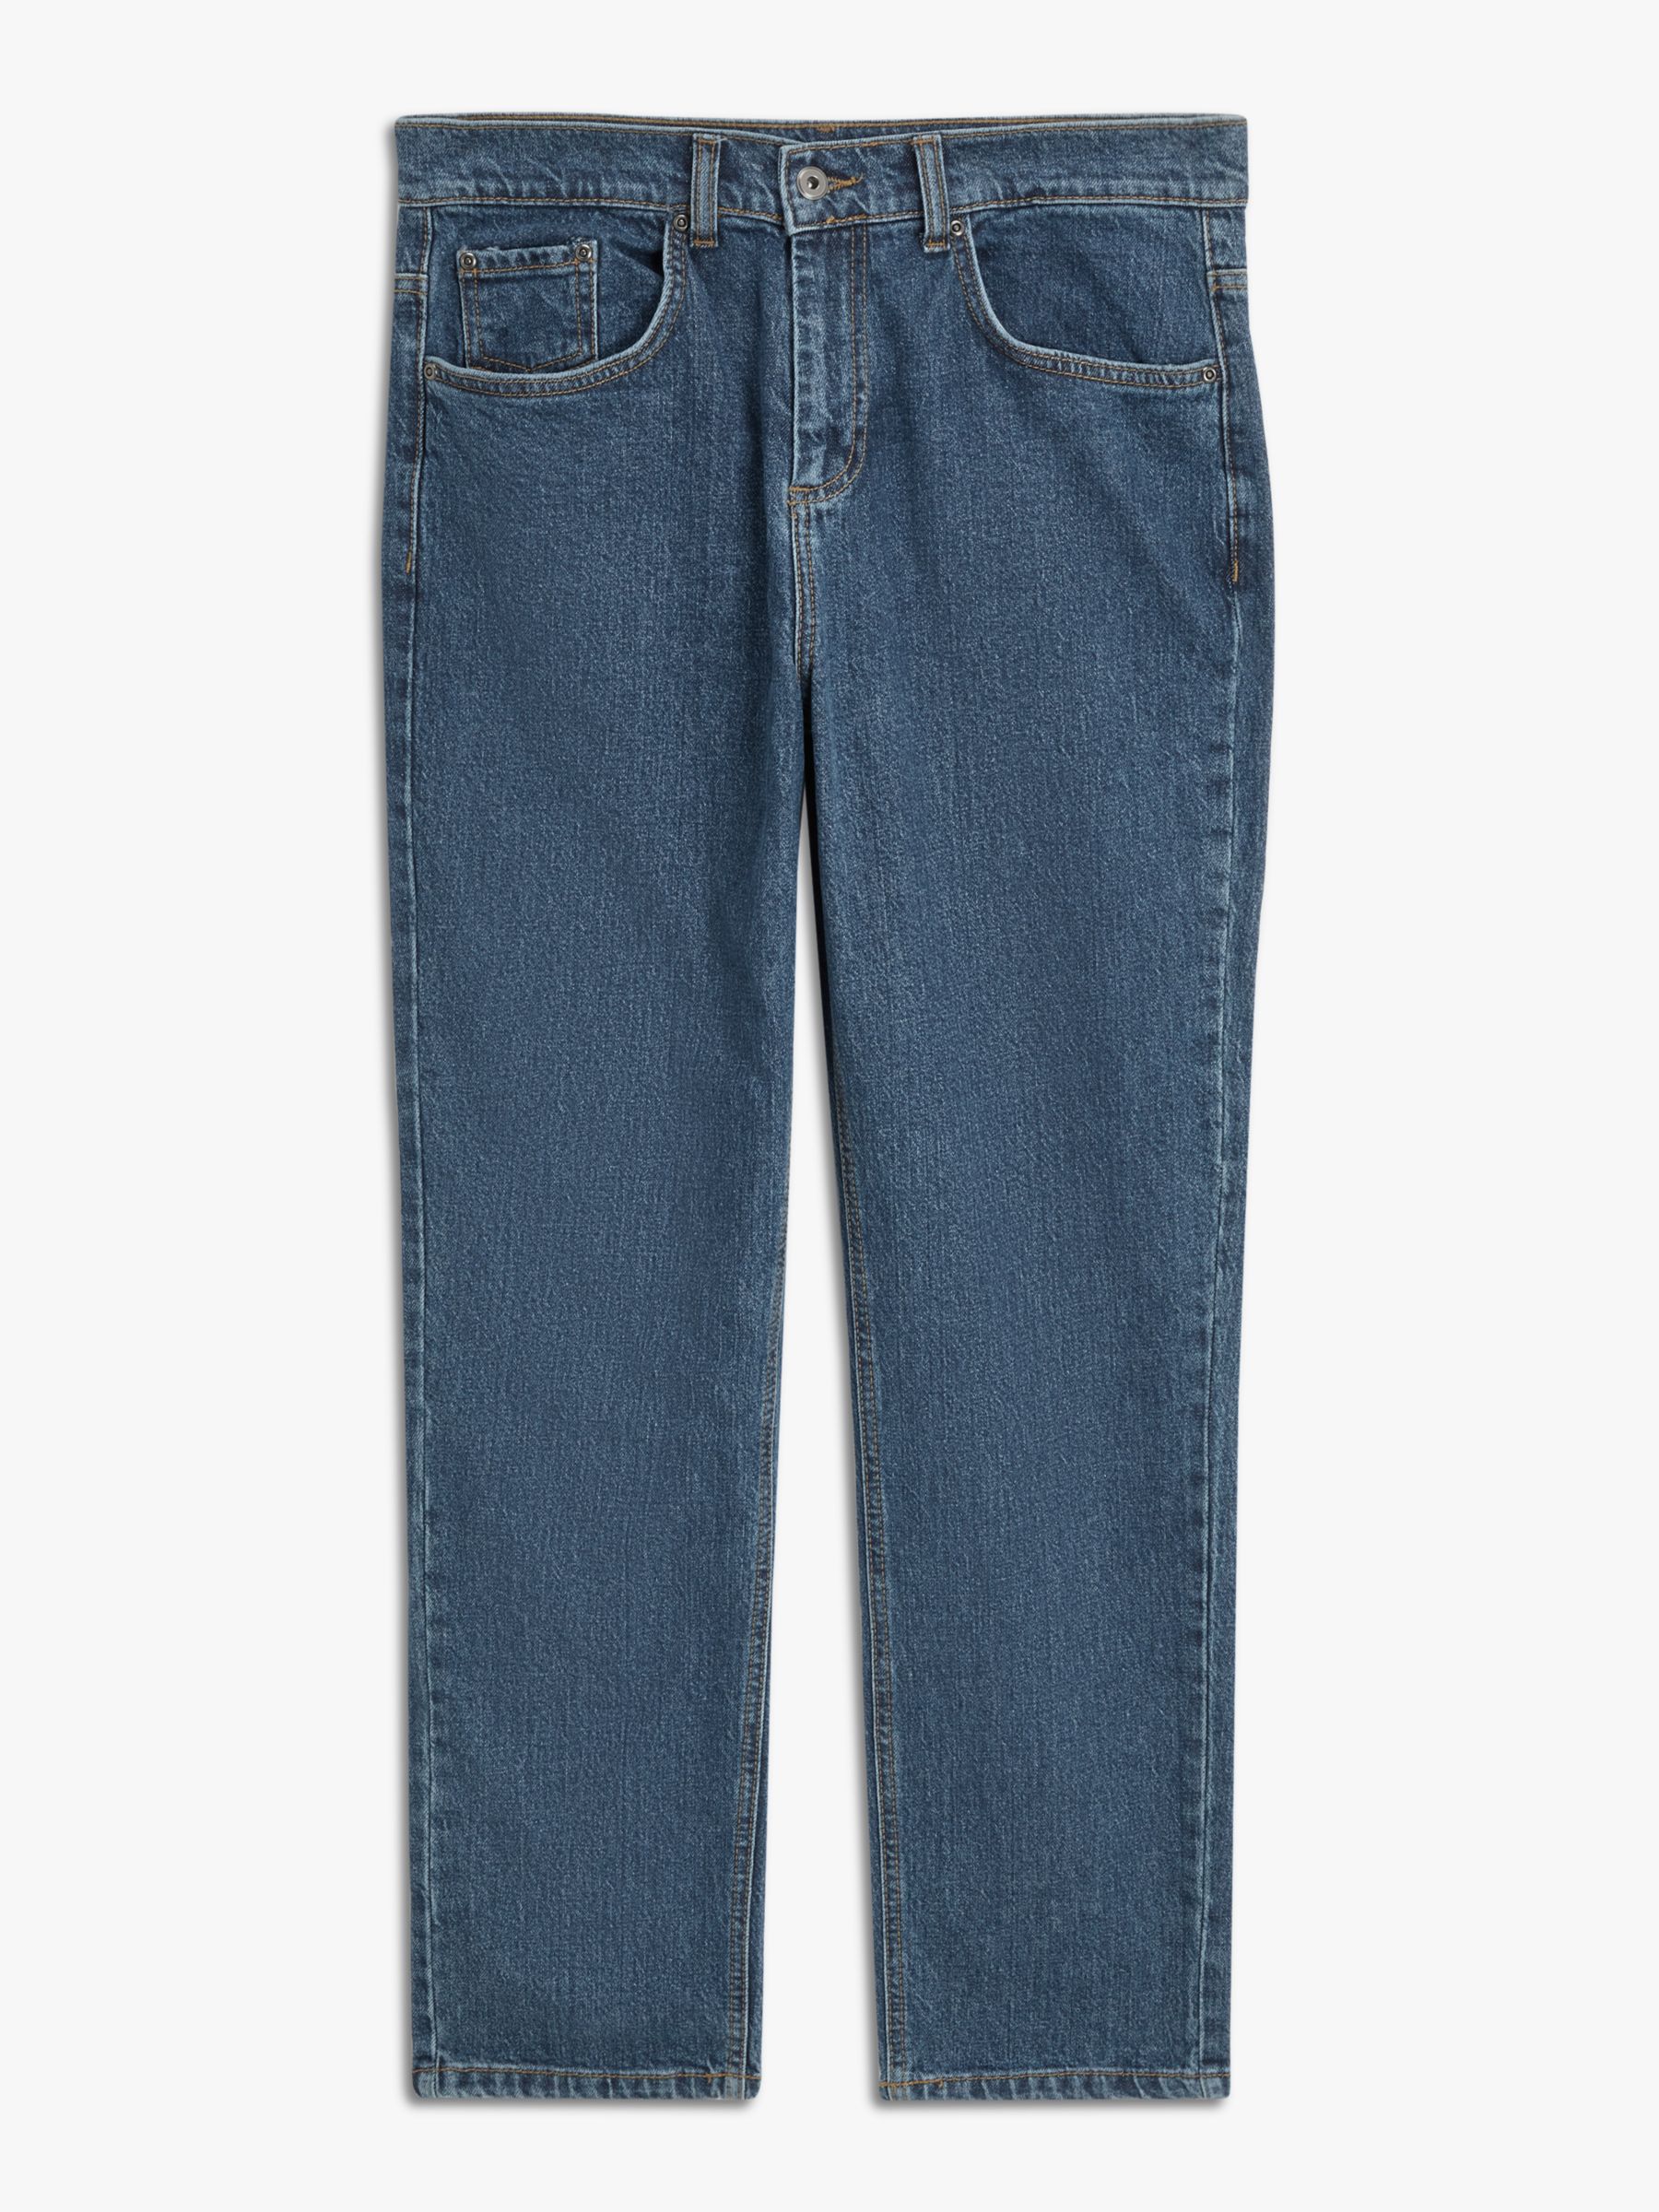 John Lewis ANYDAY Straight Fit Denim Jeans, Mid Wash, 30R